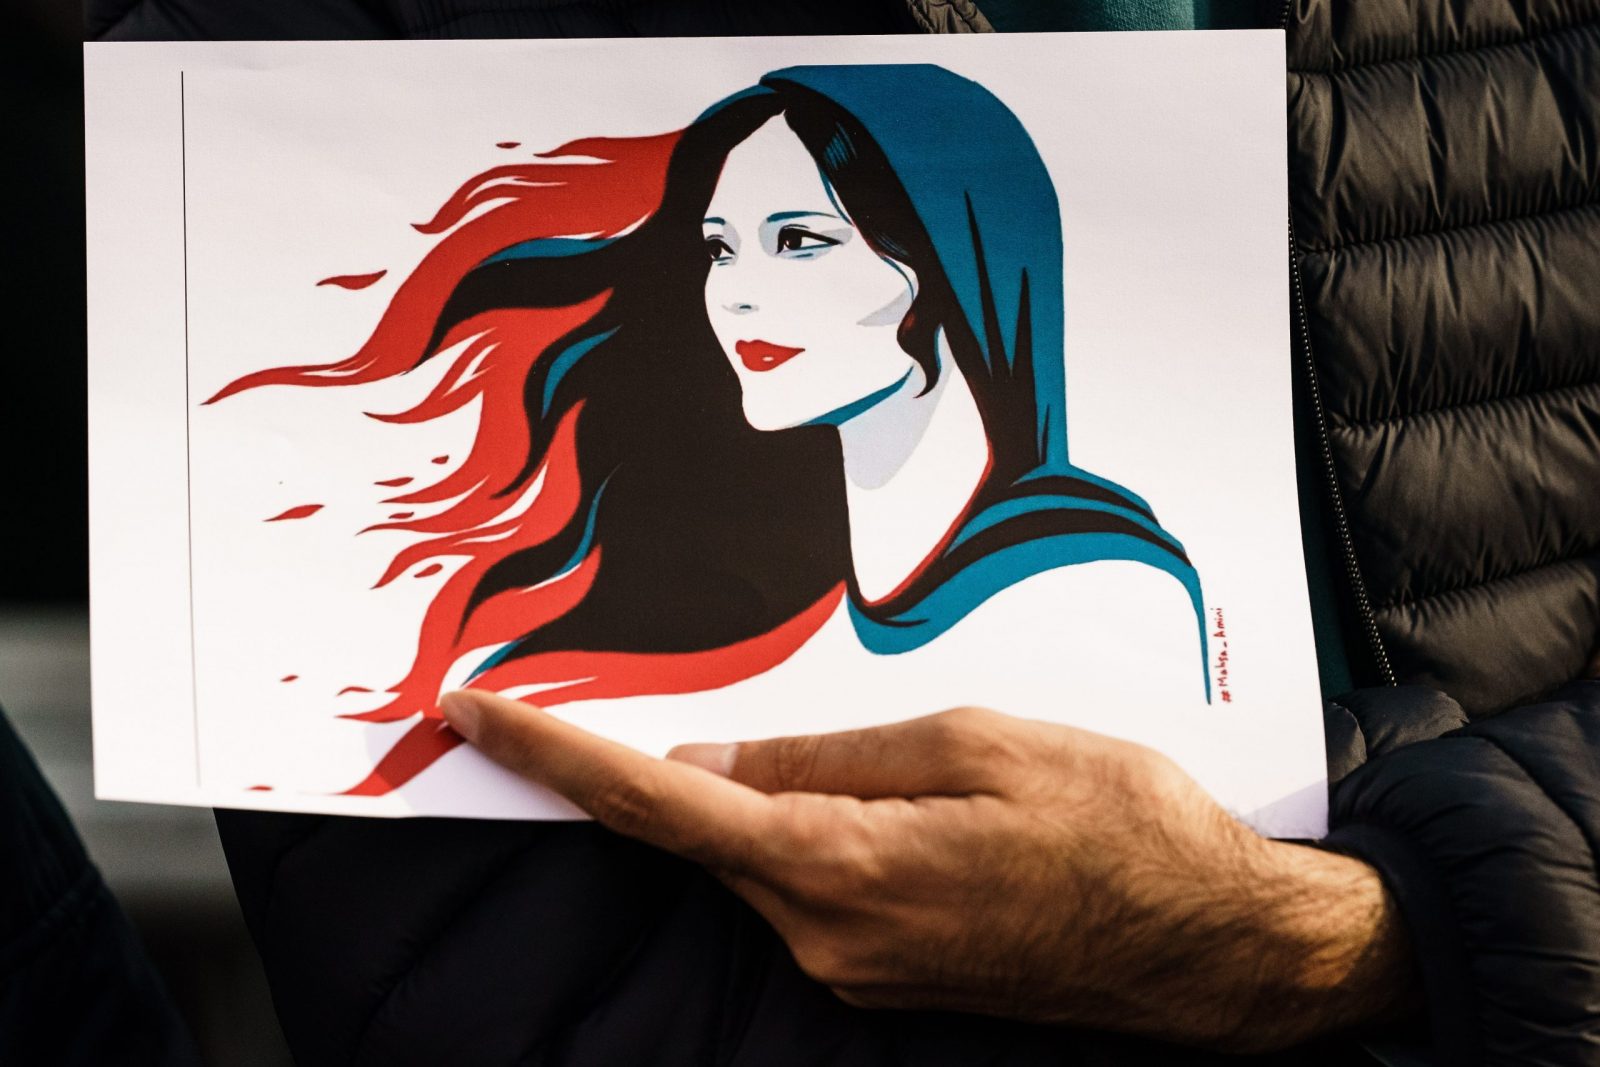 epa10201920 A participant holds an illustration showing Mahsa Amini during a rally in Berlin, Germany, 23 September 2022. Iran has faced many anti-government protests following the death of Mahsa Amini, a 22-year-old Iranian woman, who was arrested in Tehran on 13 September by the morality police, a unit responsible for enforcing Iran's strict dress code for women. She fell into a coma while in police custody and was declared dead on 16 September, with the authorities saying she died of a heart failure while her family advising that she had no prior health conditions. Her death has triggered protests in various areas in Iran and around the world. According to Iran's state news agency IRNA, Iranian President Ebrahim Raisi expressed his sympathy to the family of Amini on a phone call and assured them that her death will be investigated carefully. Chief Justice of Iran Gholam-Hossein Mohseni-Eje'i assured her family that upon its conclusion, the investigation results by the Iranian Legal Medicine Organization will be announced without any special considerations.  EPA/CLEMENS BILAN